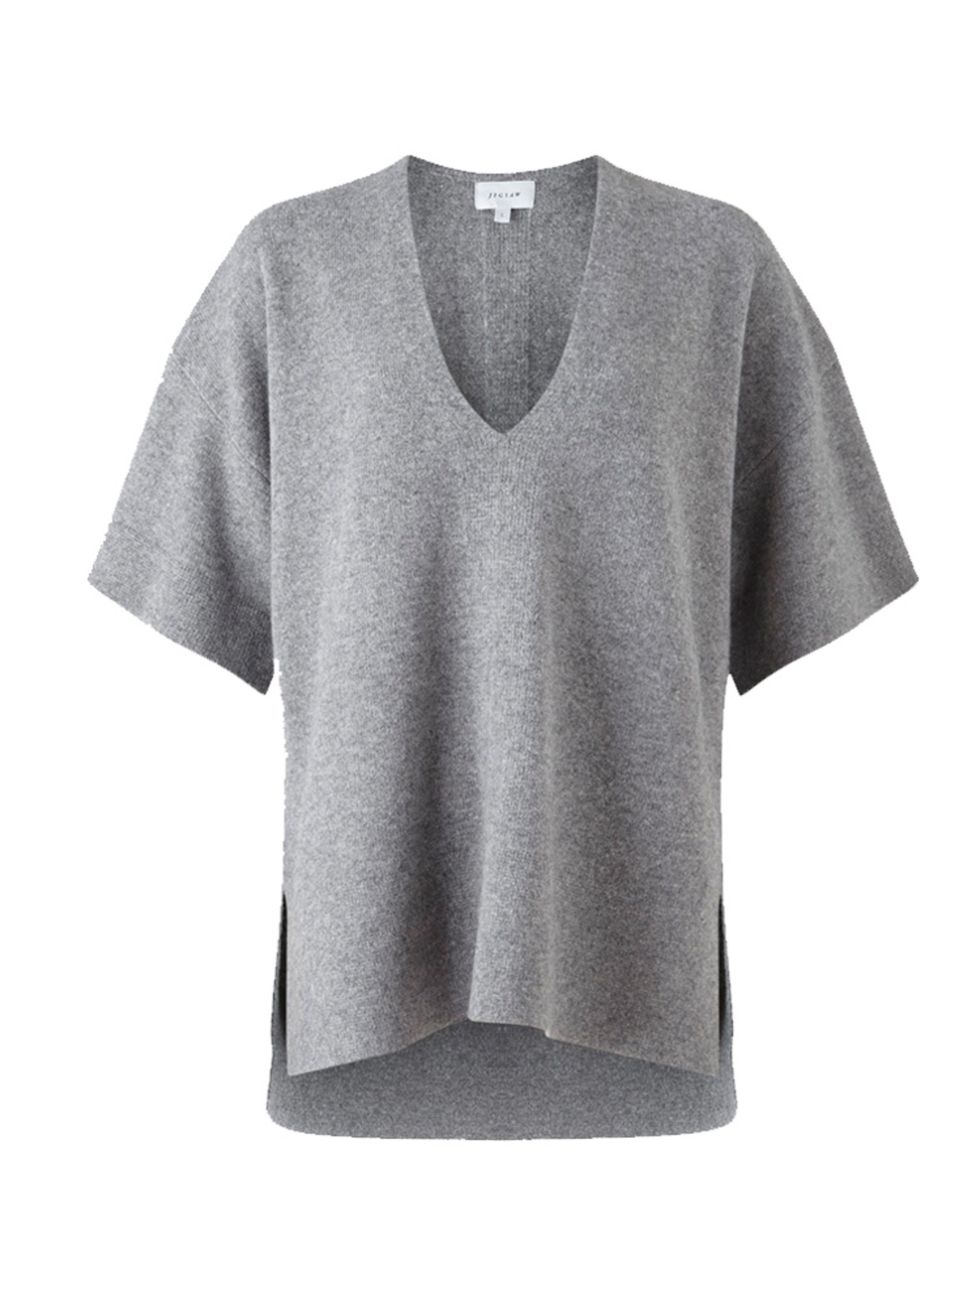 <p>Market and Retail Editor Harriet Stewart will be pairing this oversized knit with a white flippy skirt for those cool summer evenings. </p>

<p> </p>

<p><a href="http://www.jigsaw-online.com/products/fleece-wool-kimono-tunic-sweater-11578" target="_bl